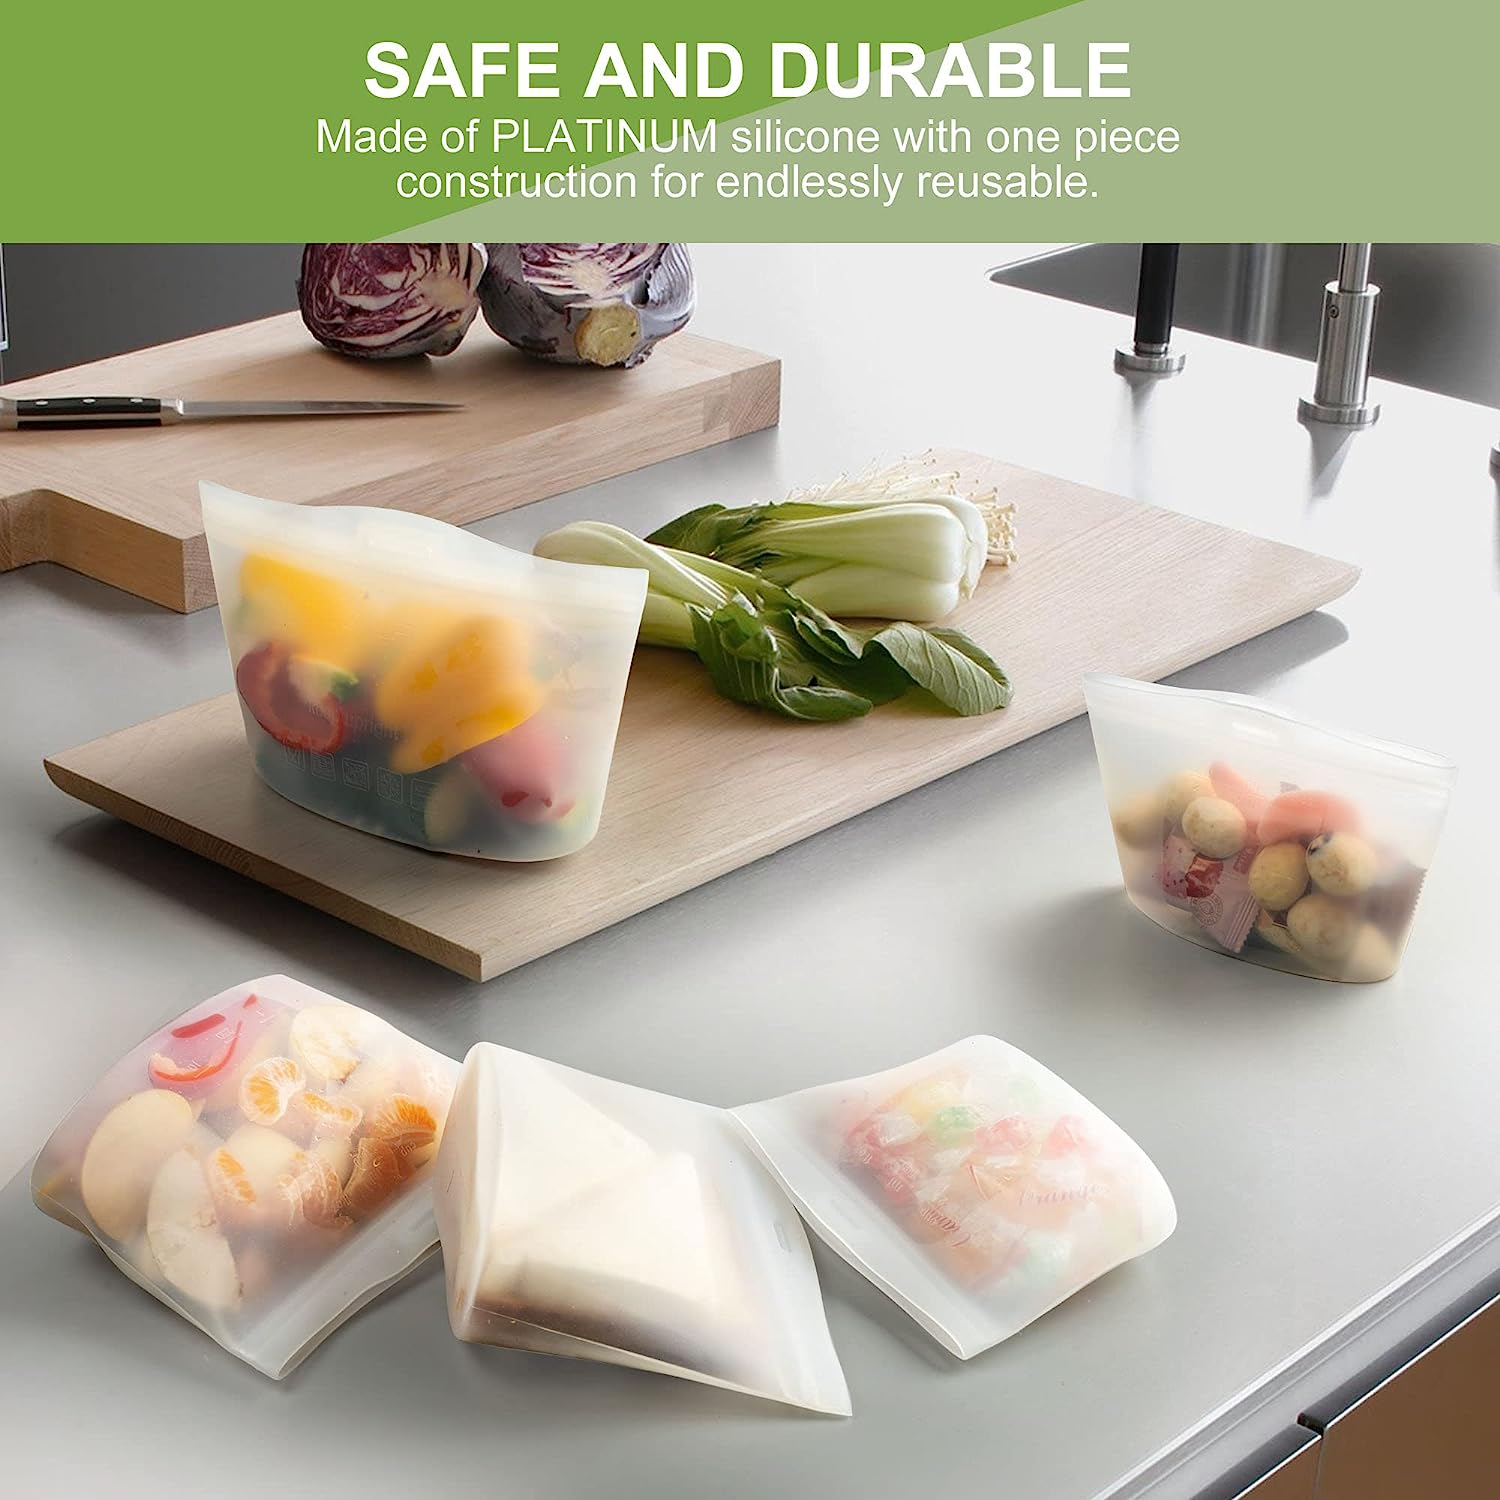 Finest Reusable Storage Bags in 2023